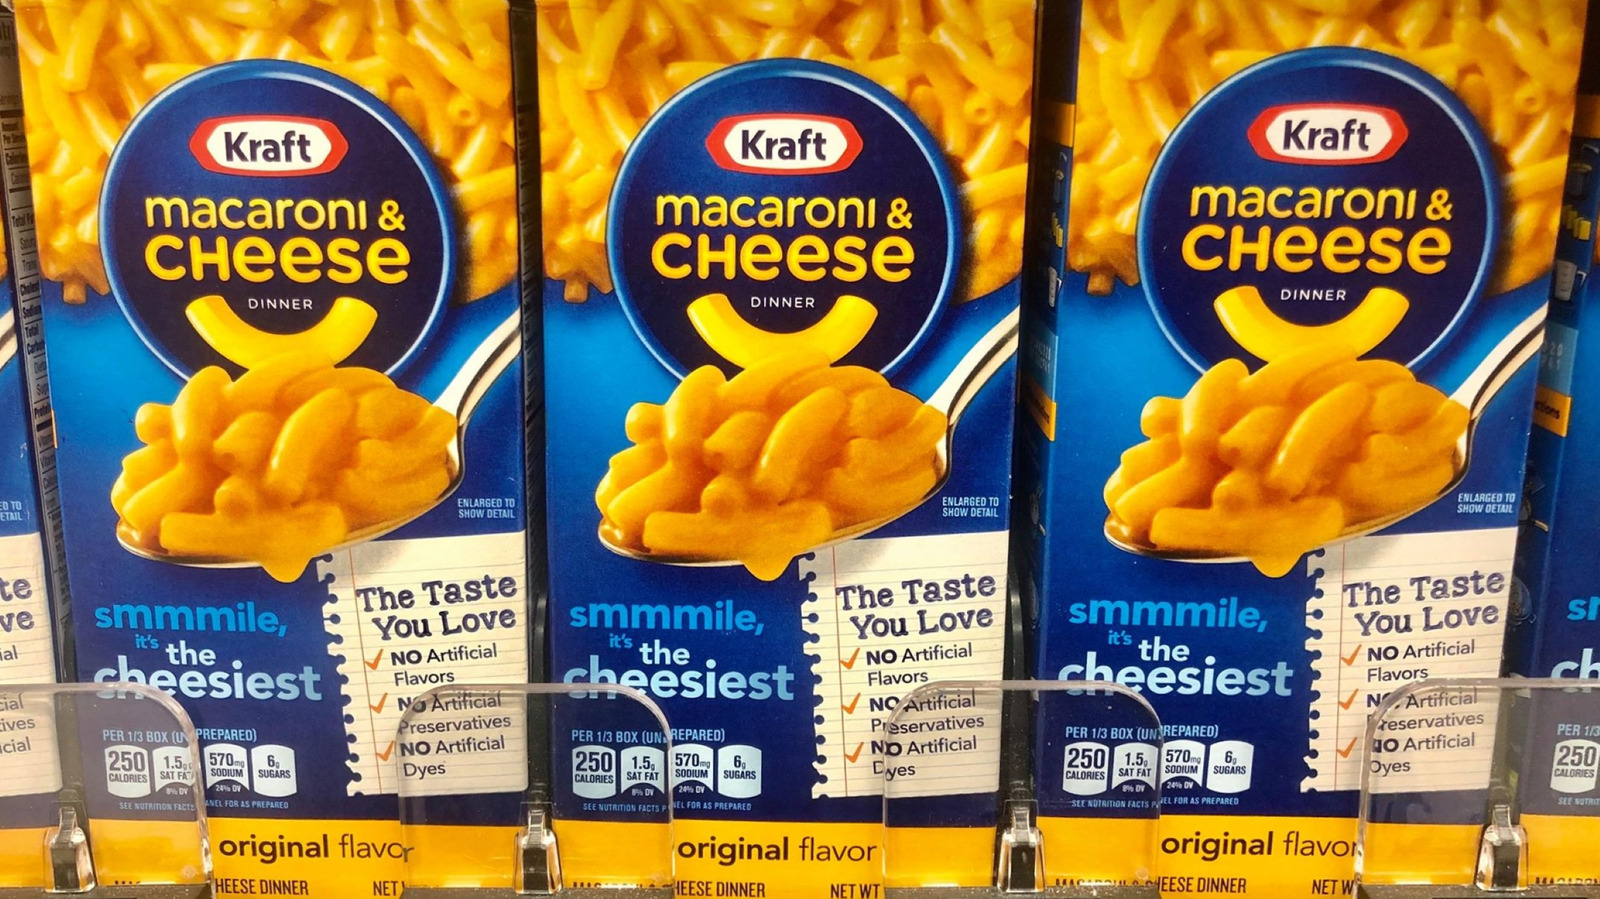 boxed mac and cheese without milk or butter